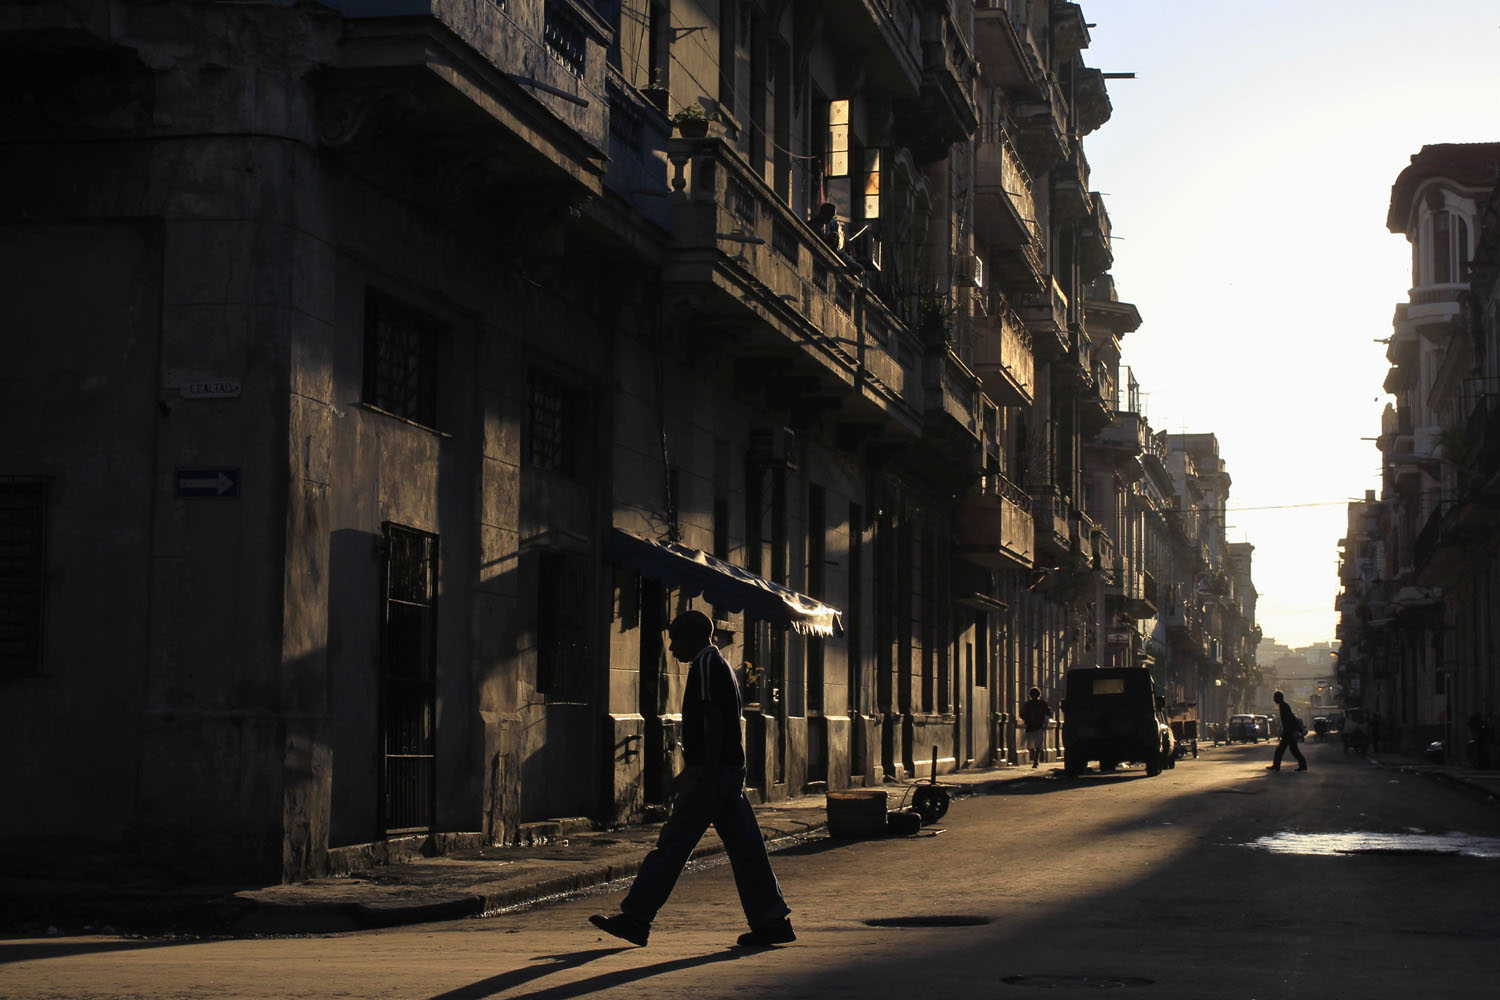 People are silhouetted as they walk along a street in Havana